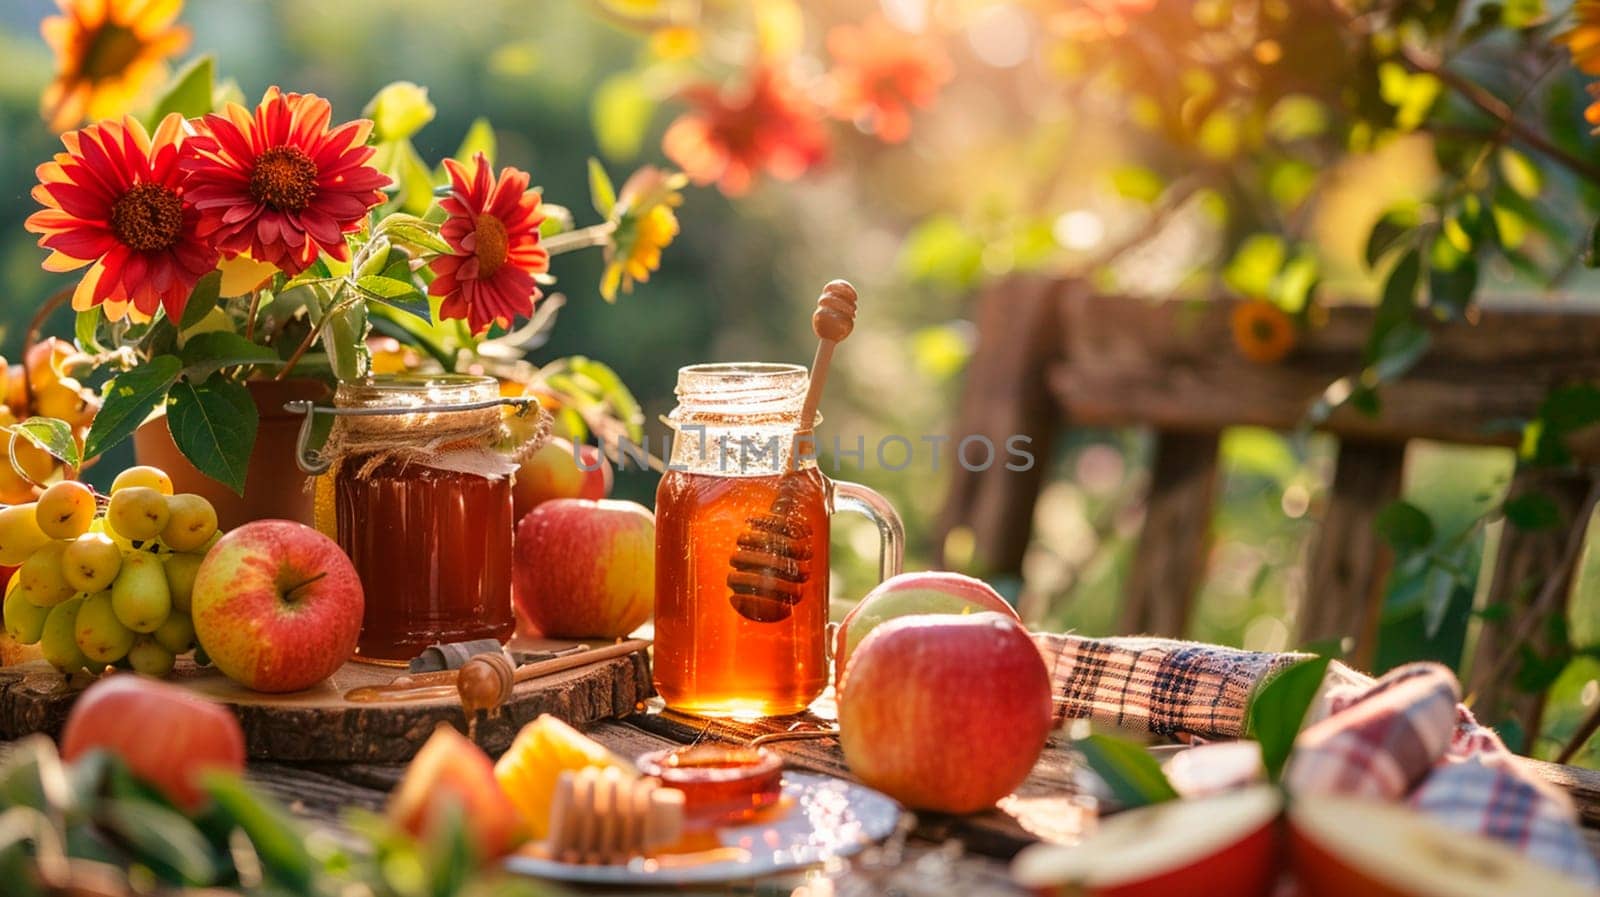 apples and honey in the garden, saved. Selective focus. food.